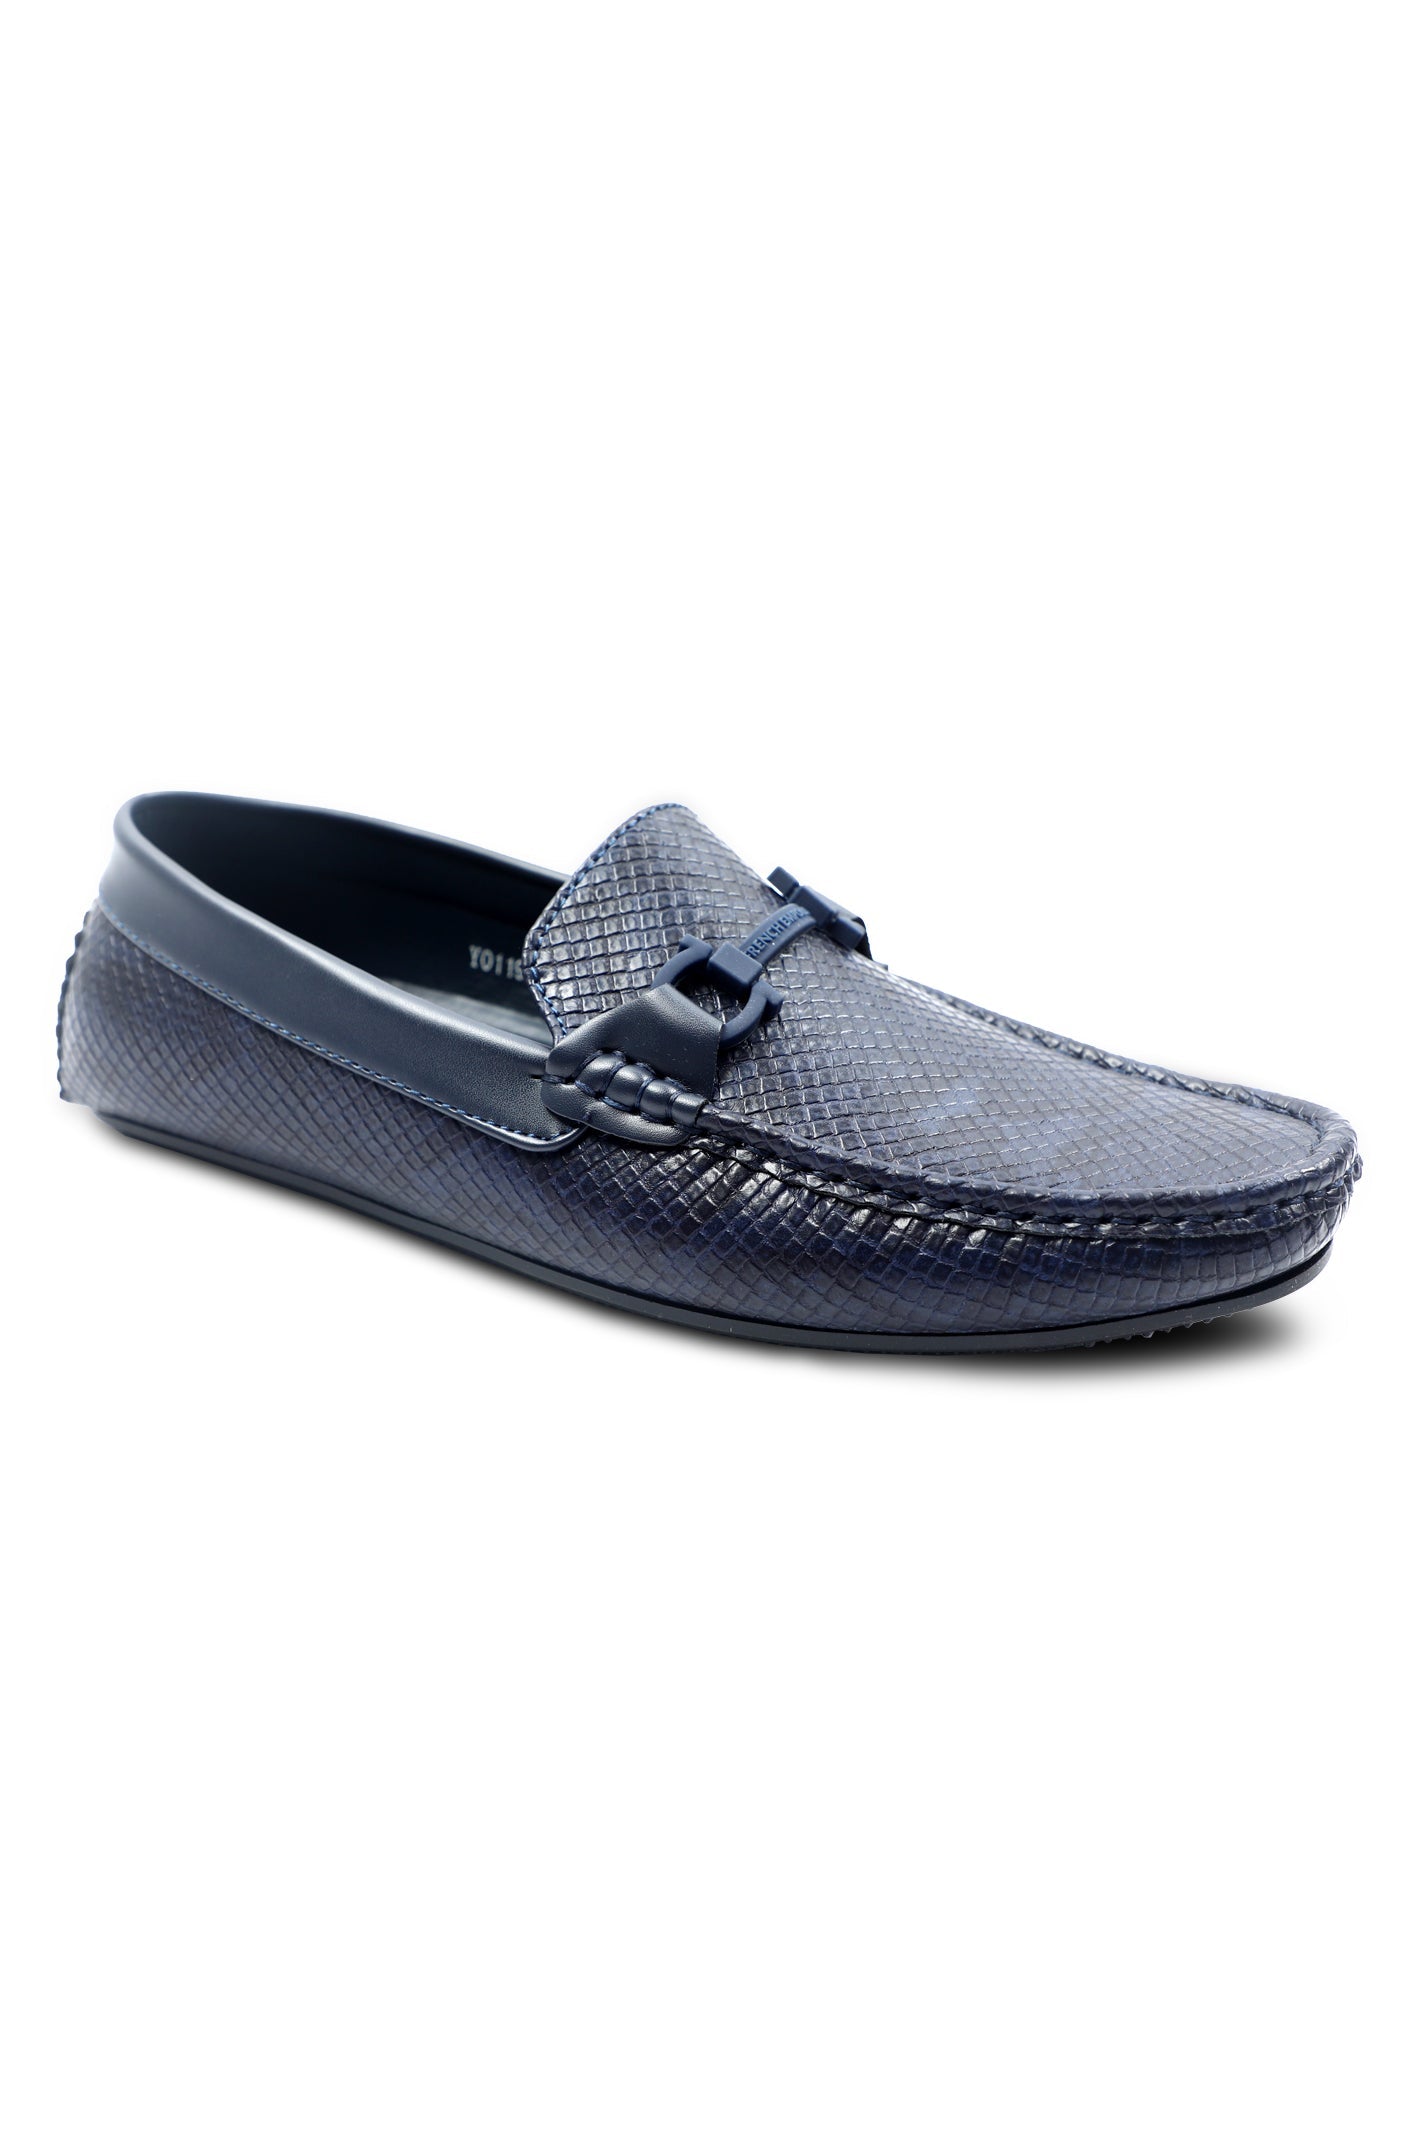 Casual Shoes For Men in Navy SKU: SMC-0068-NAVY - Diners